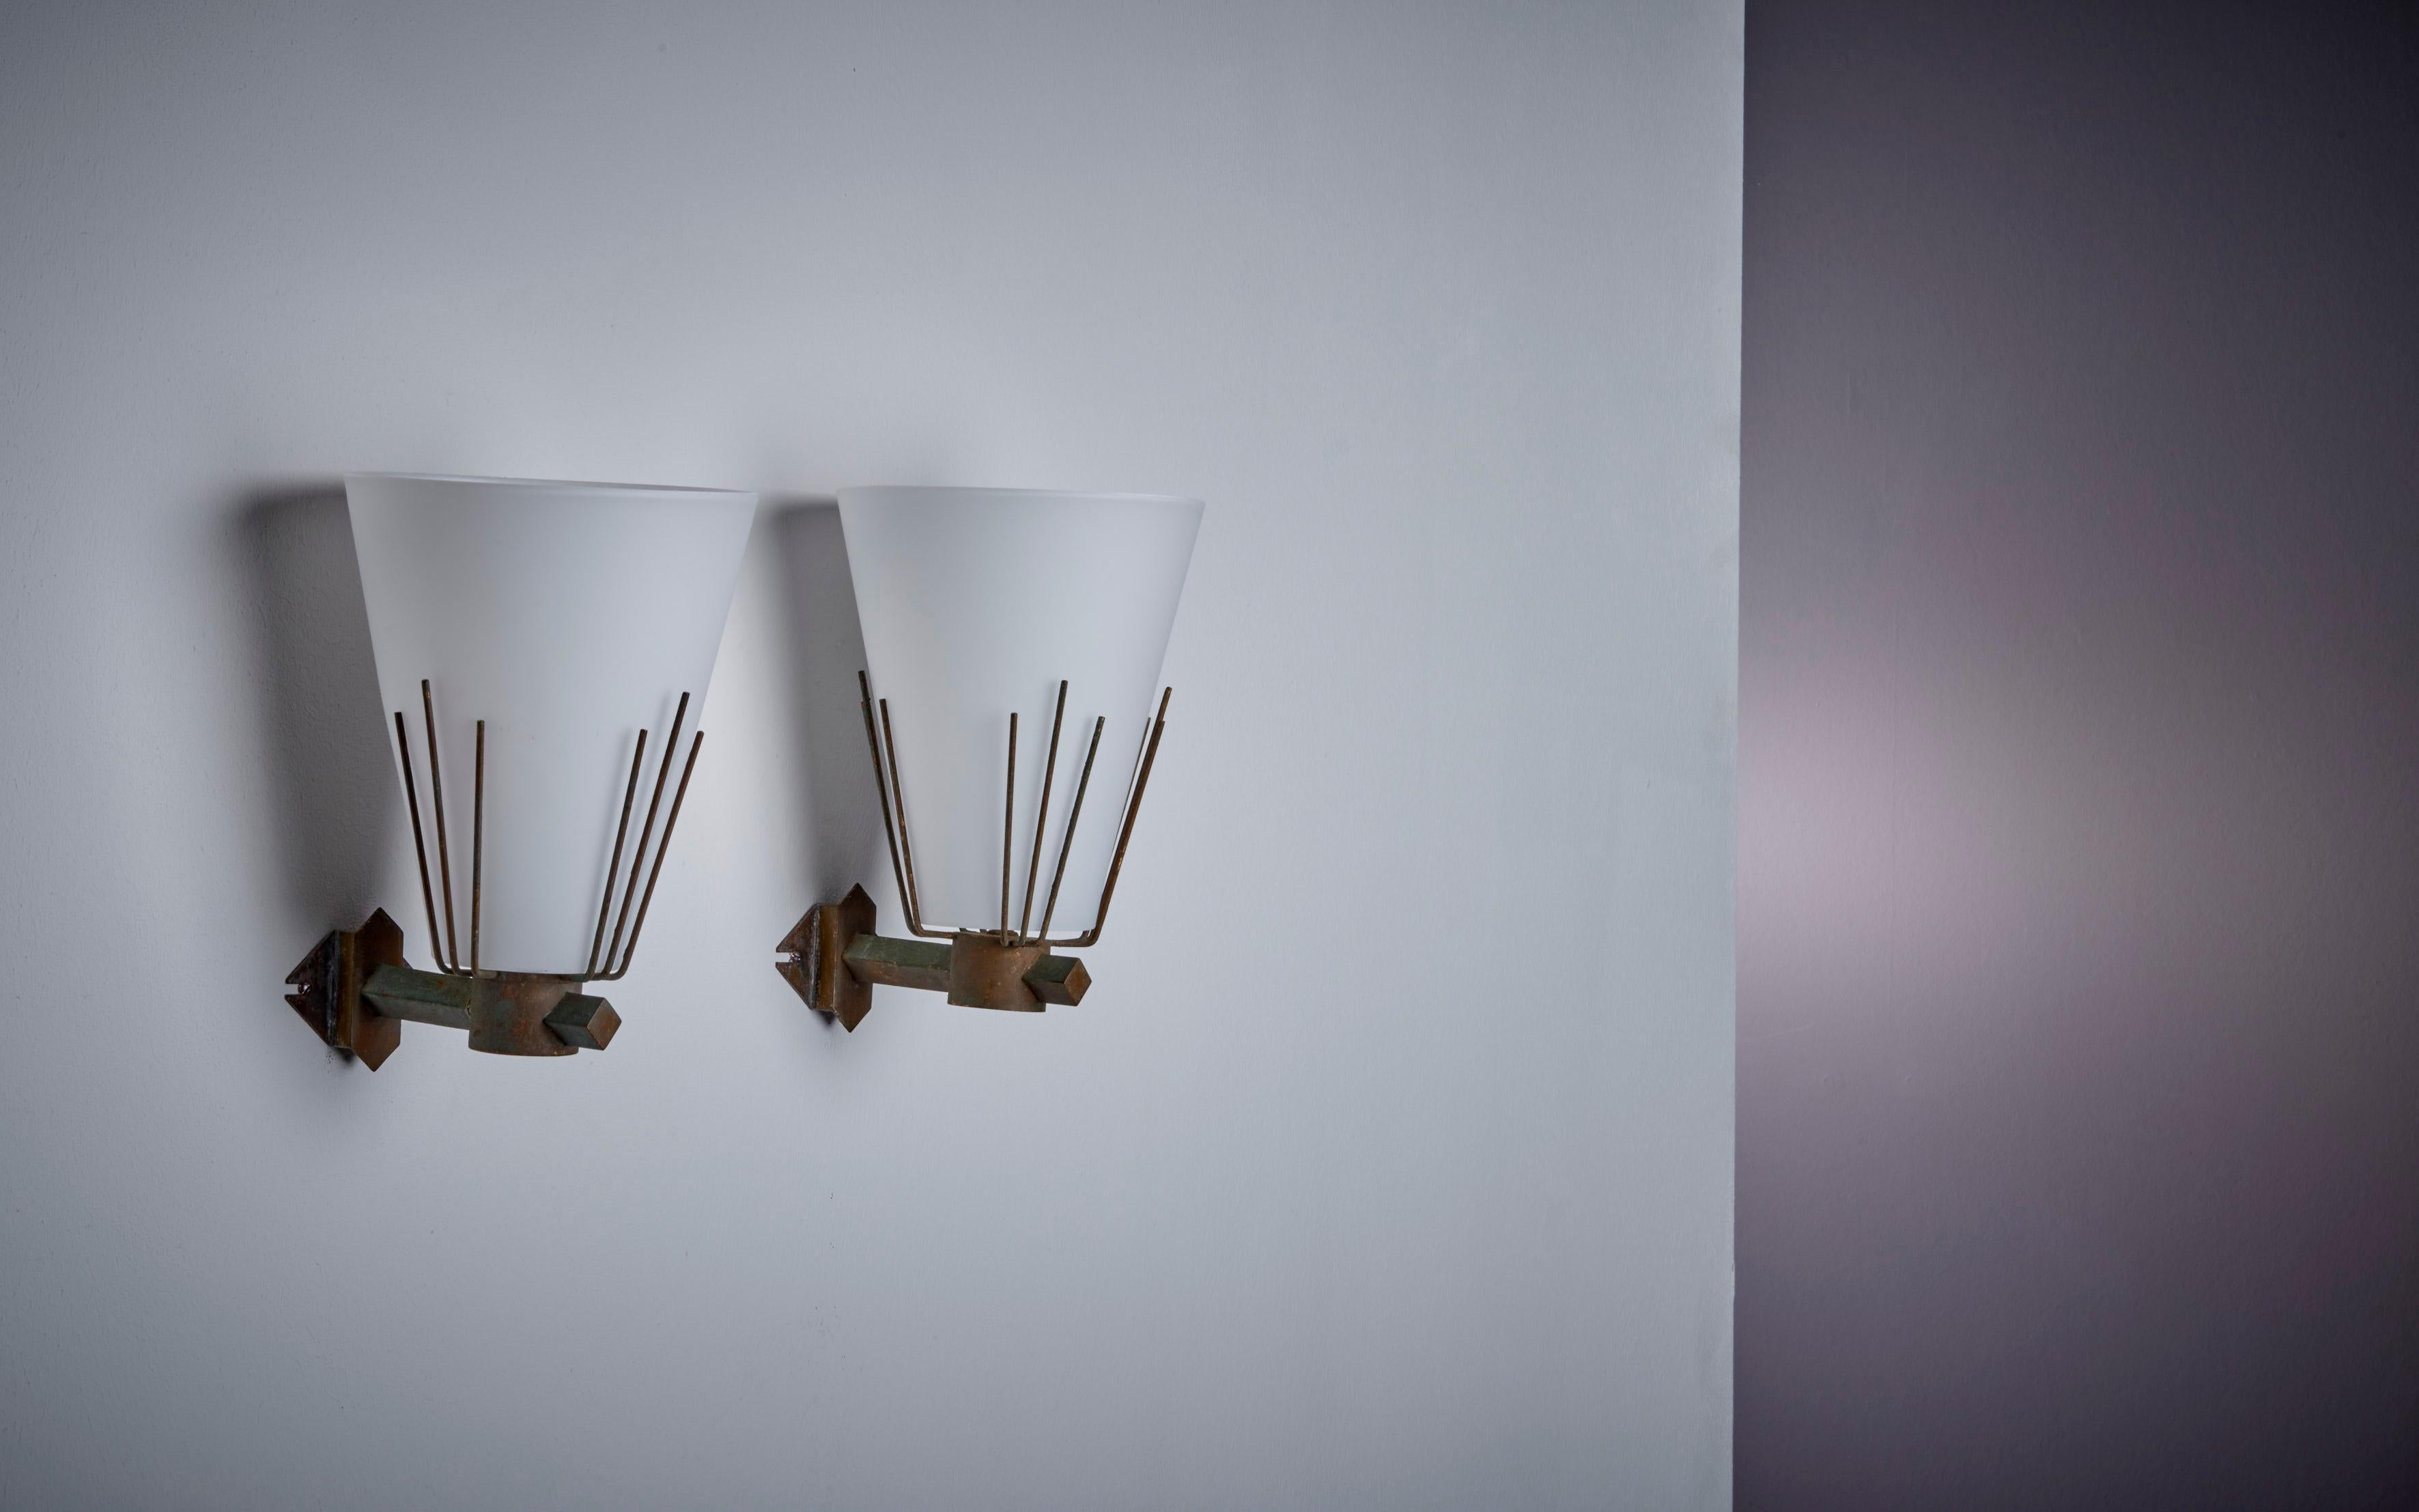 Pair of Wall Lamps in Glass and Brass, Italy - 1950s. Price is per pair, two pairs available.
Please note: Lamp should be fitted professionally in accordance to local requirements. 1xE14 each